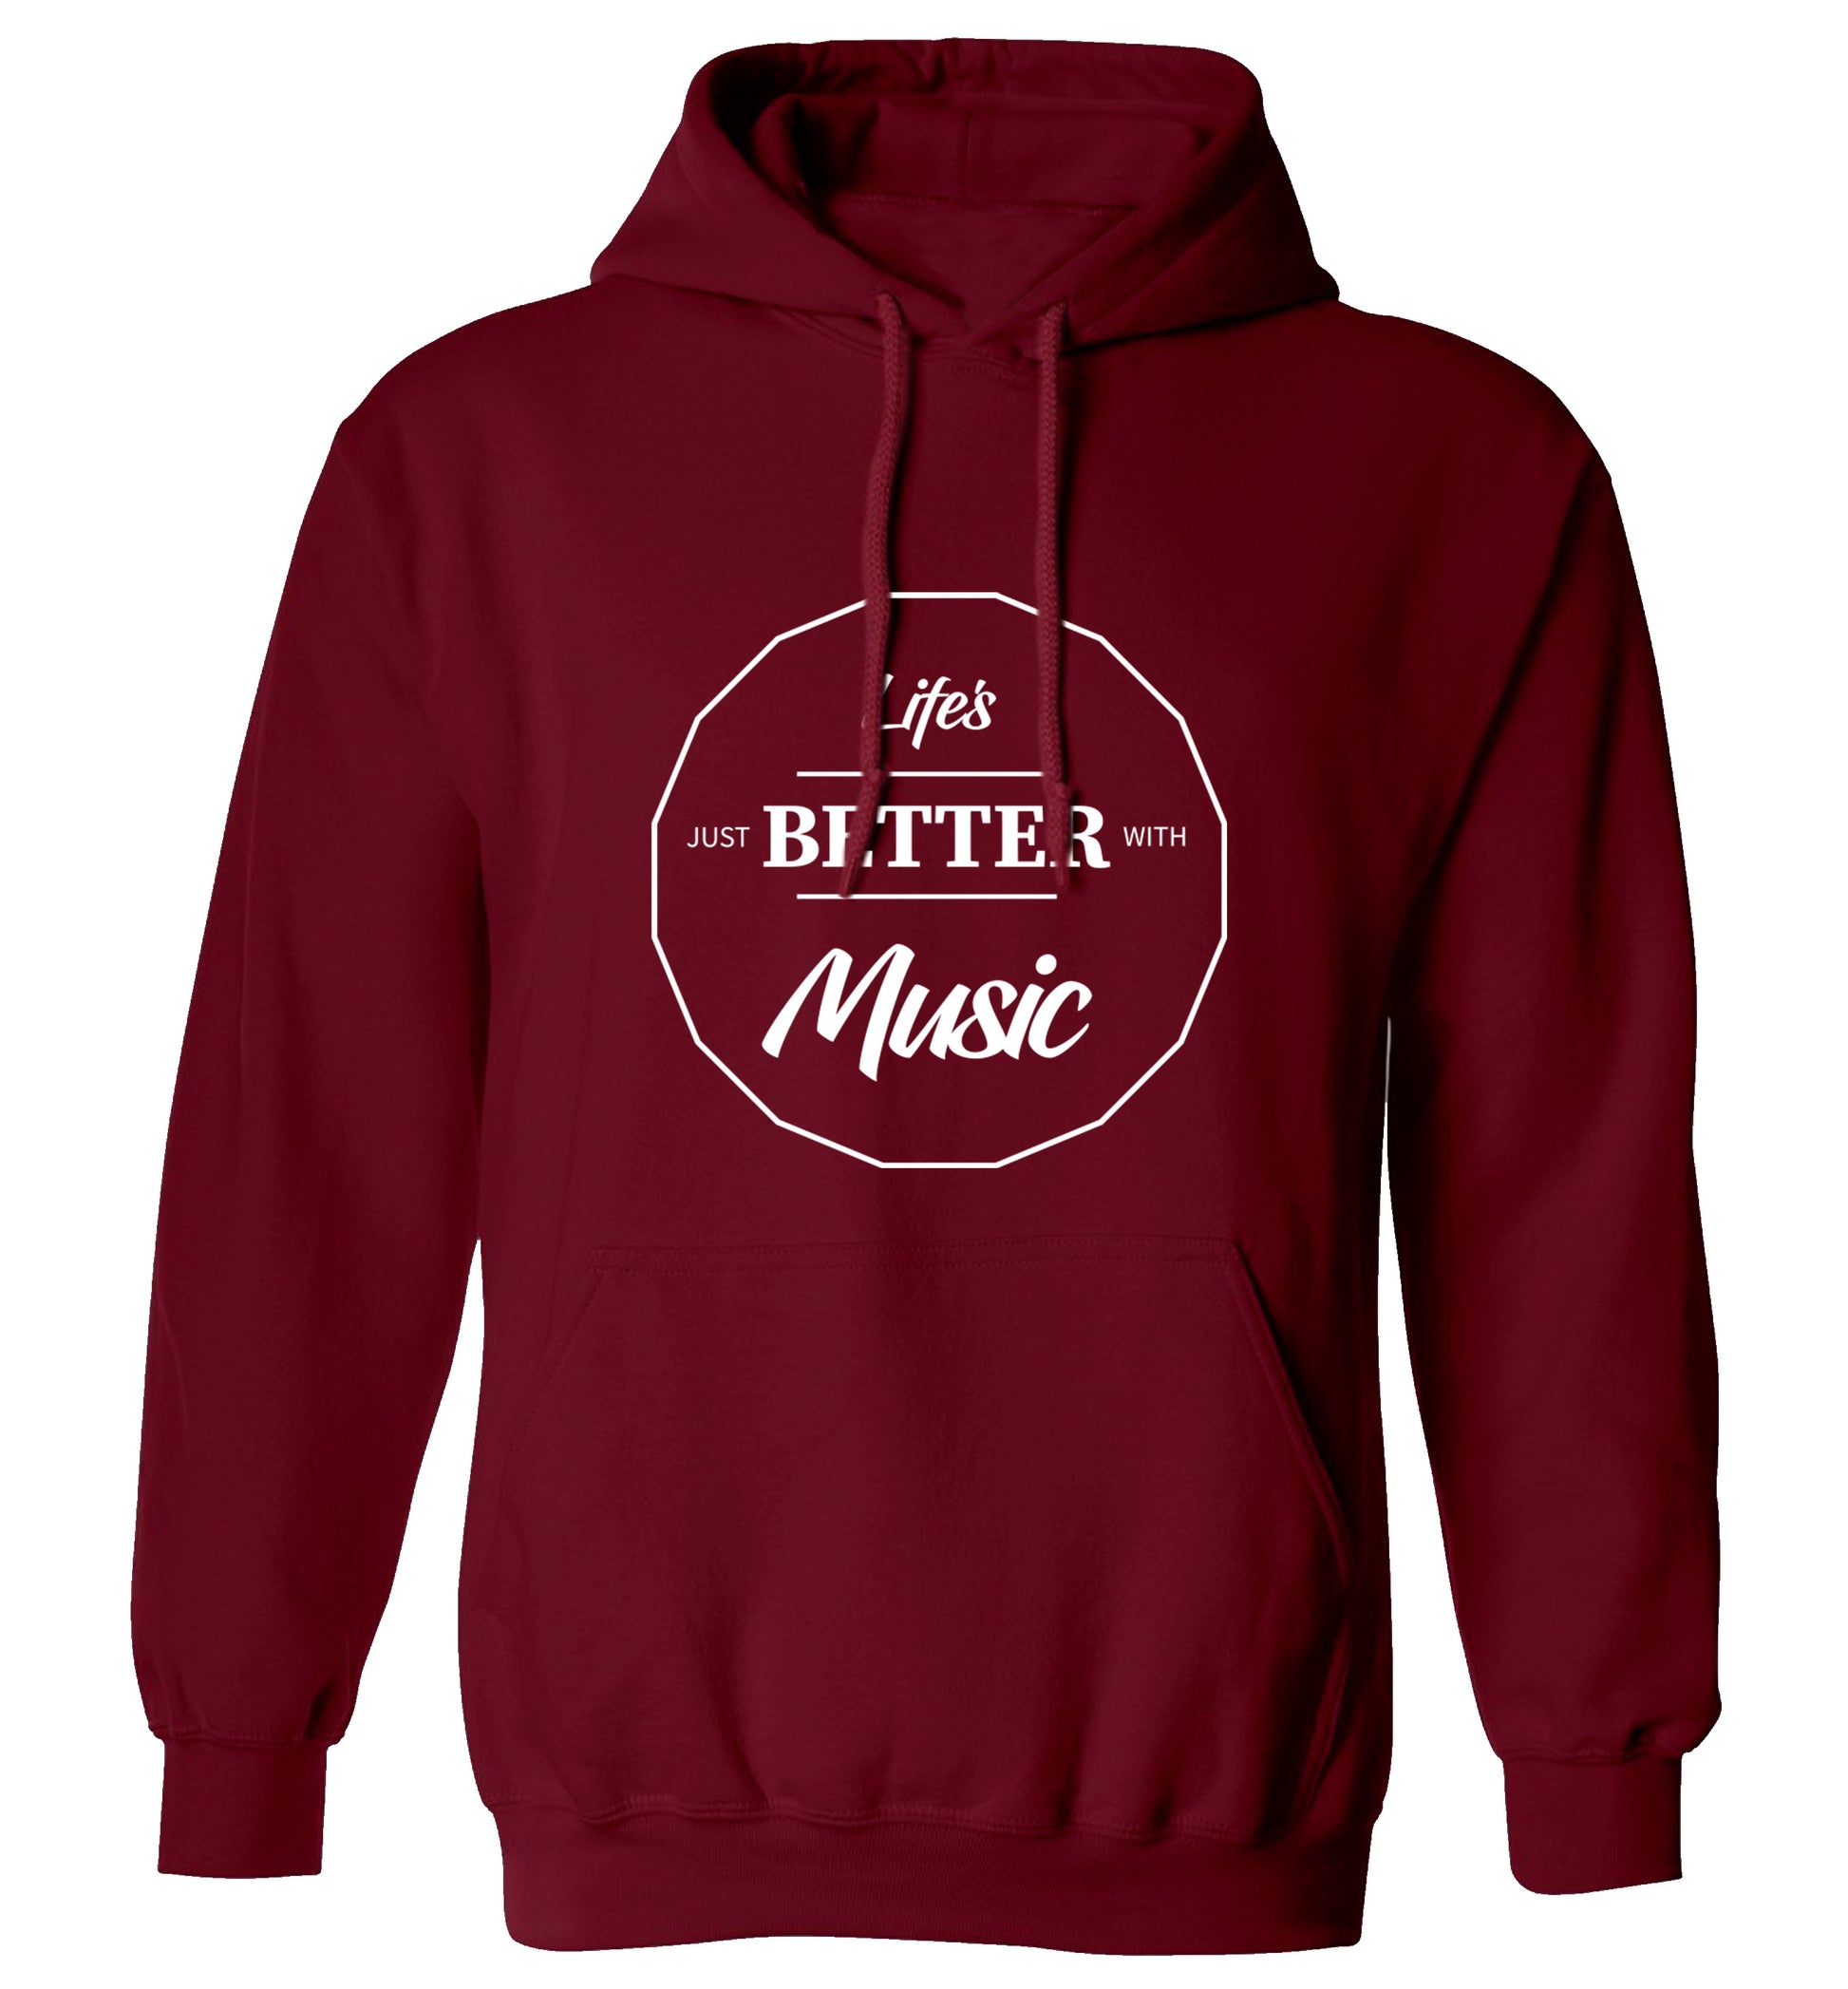 Life is Better With Music adults unisex maroon hoodie 2XL